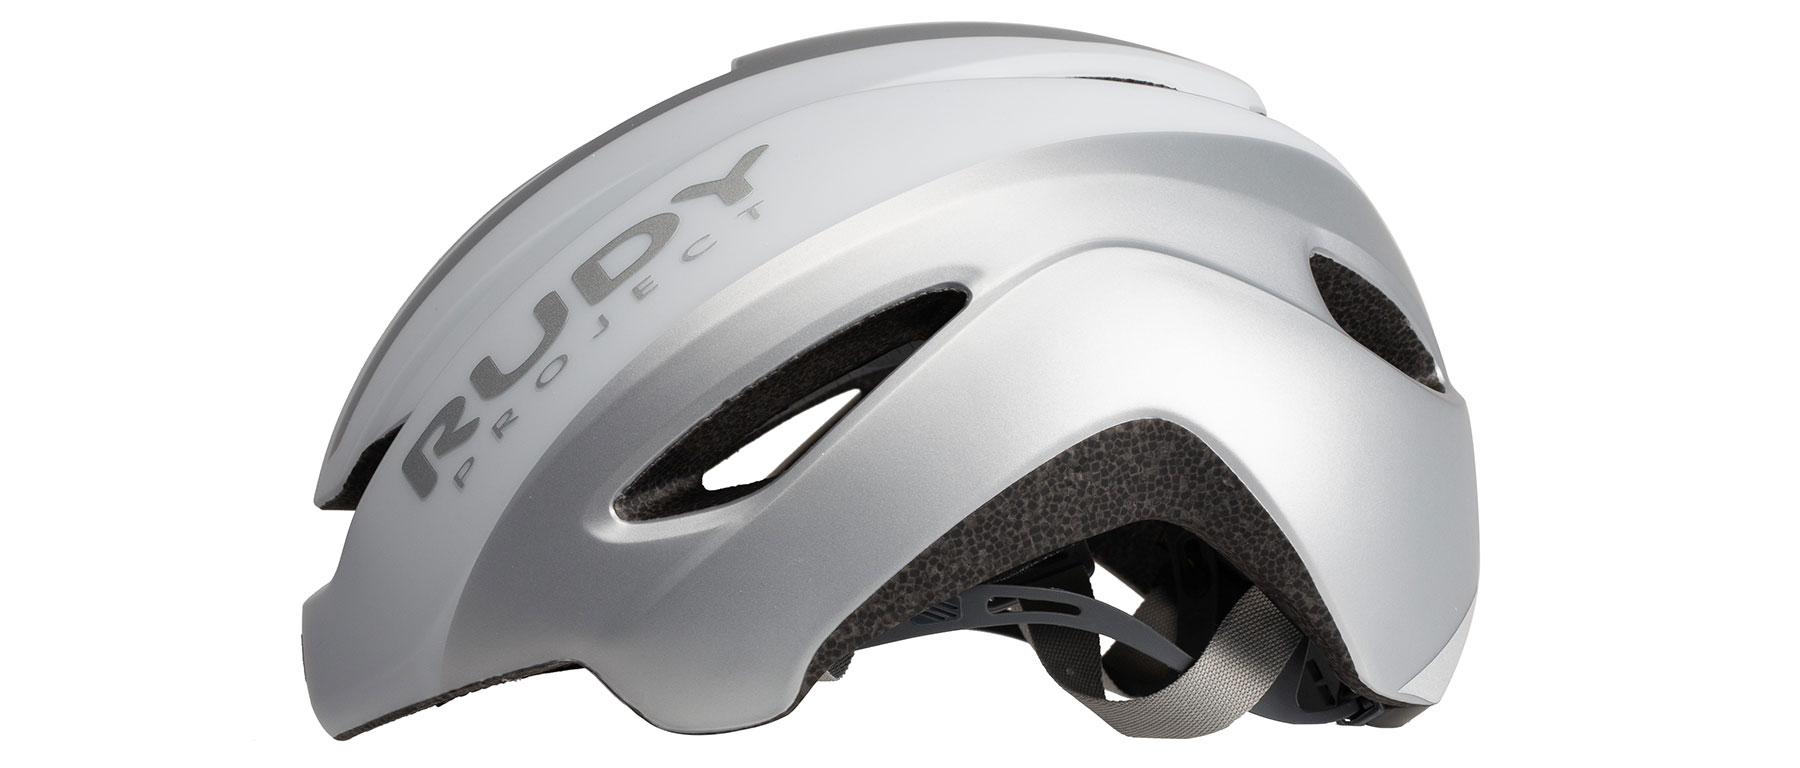 New Rudy Project Volantis Road Bike Helmet with Lens Visor Choice of Sizes 